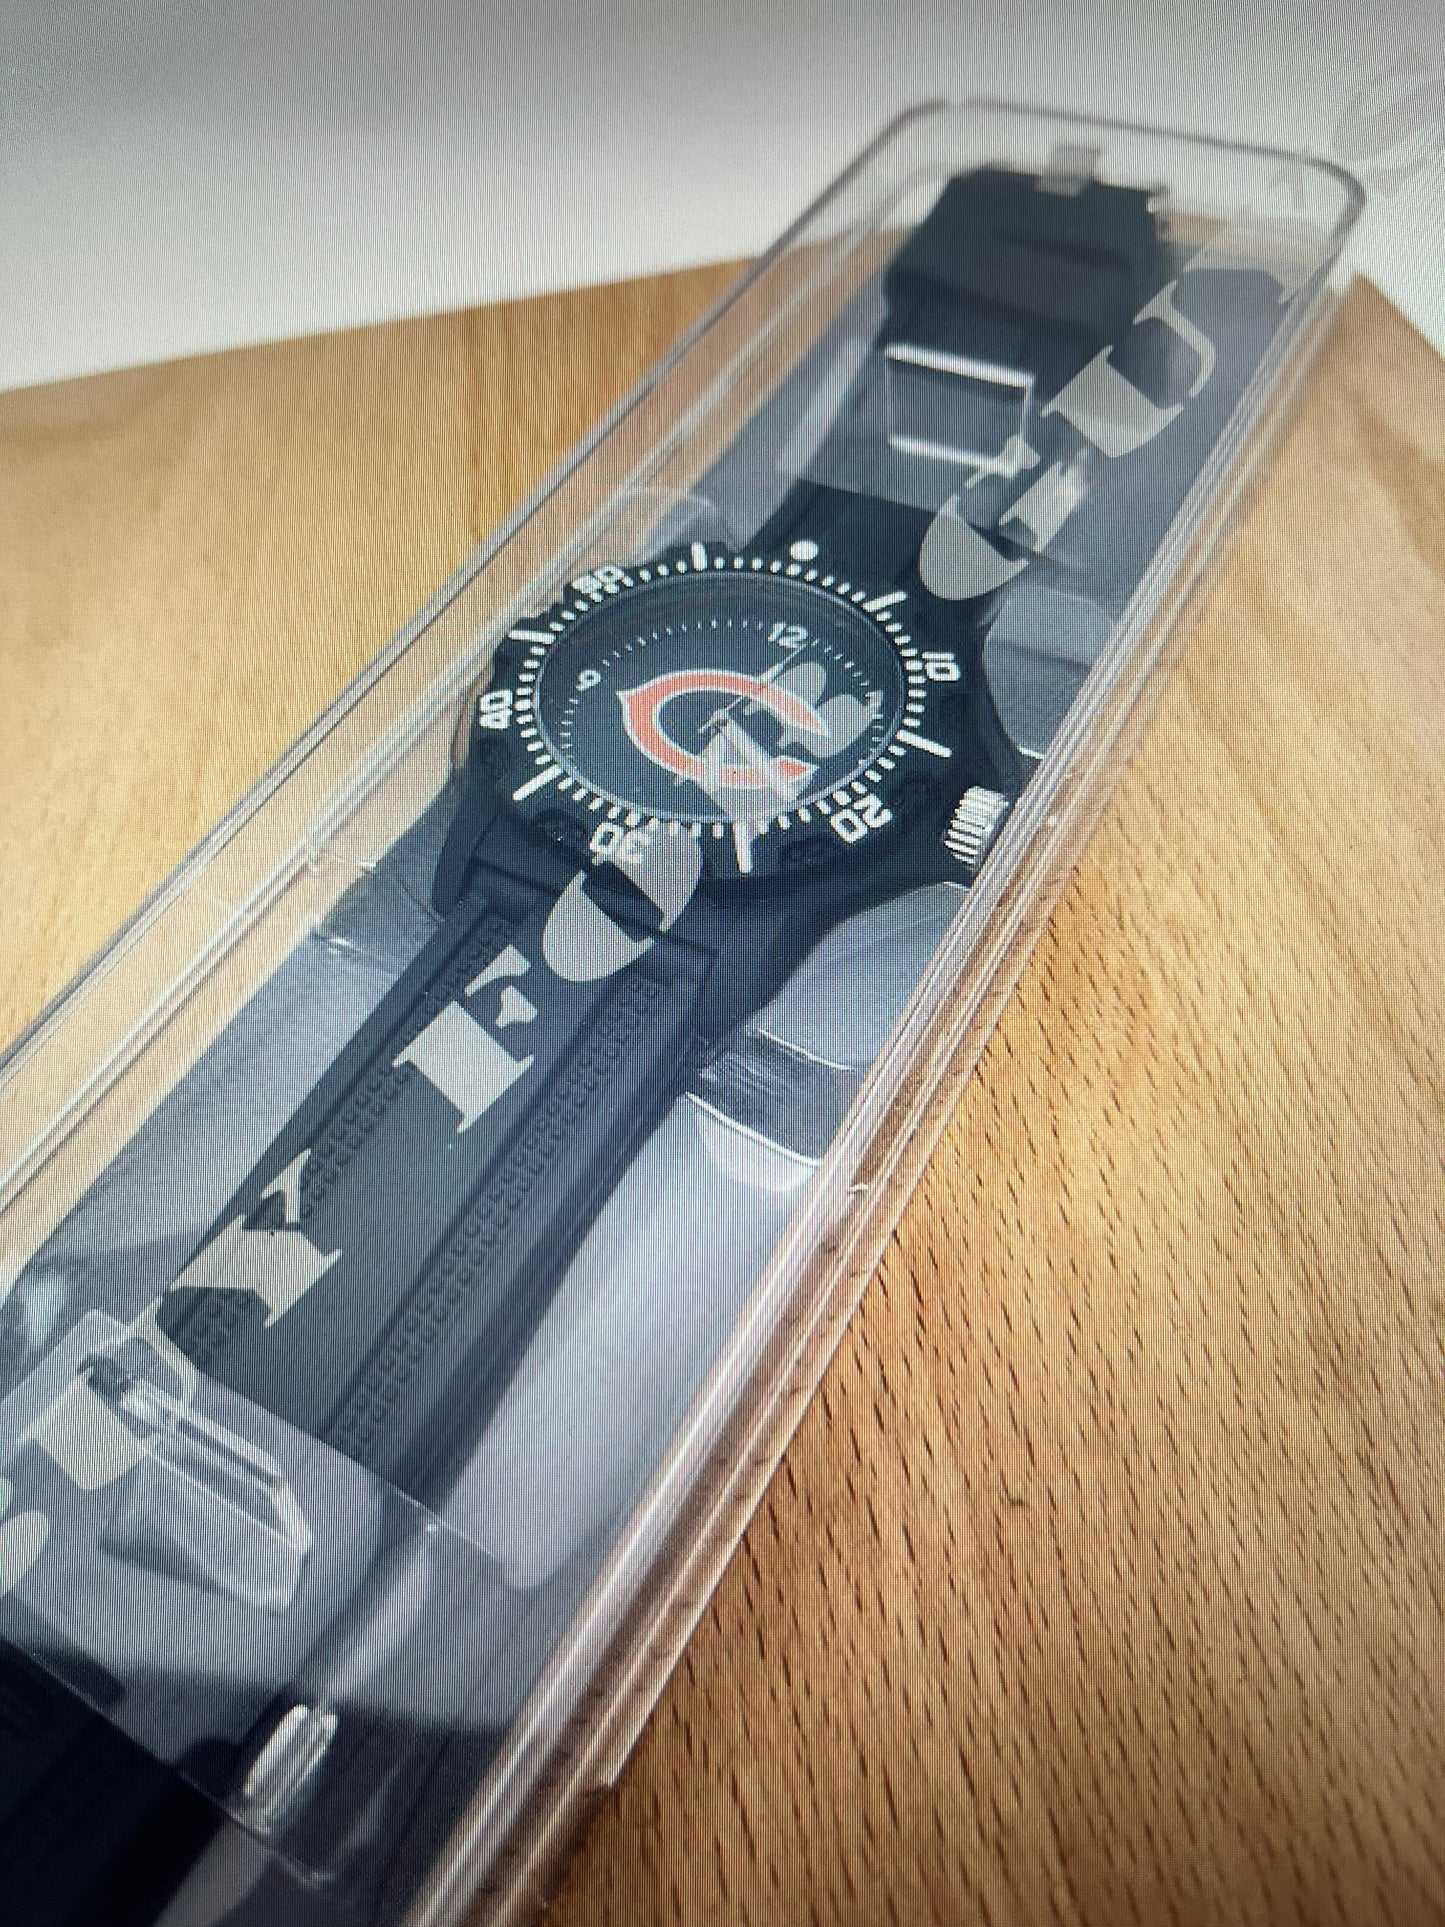 NFL Watches